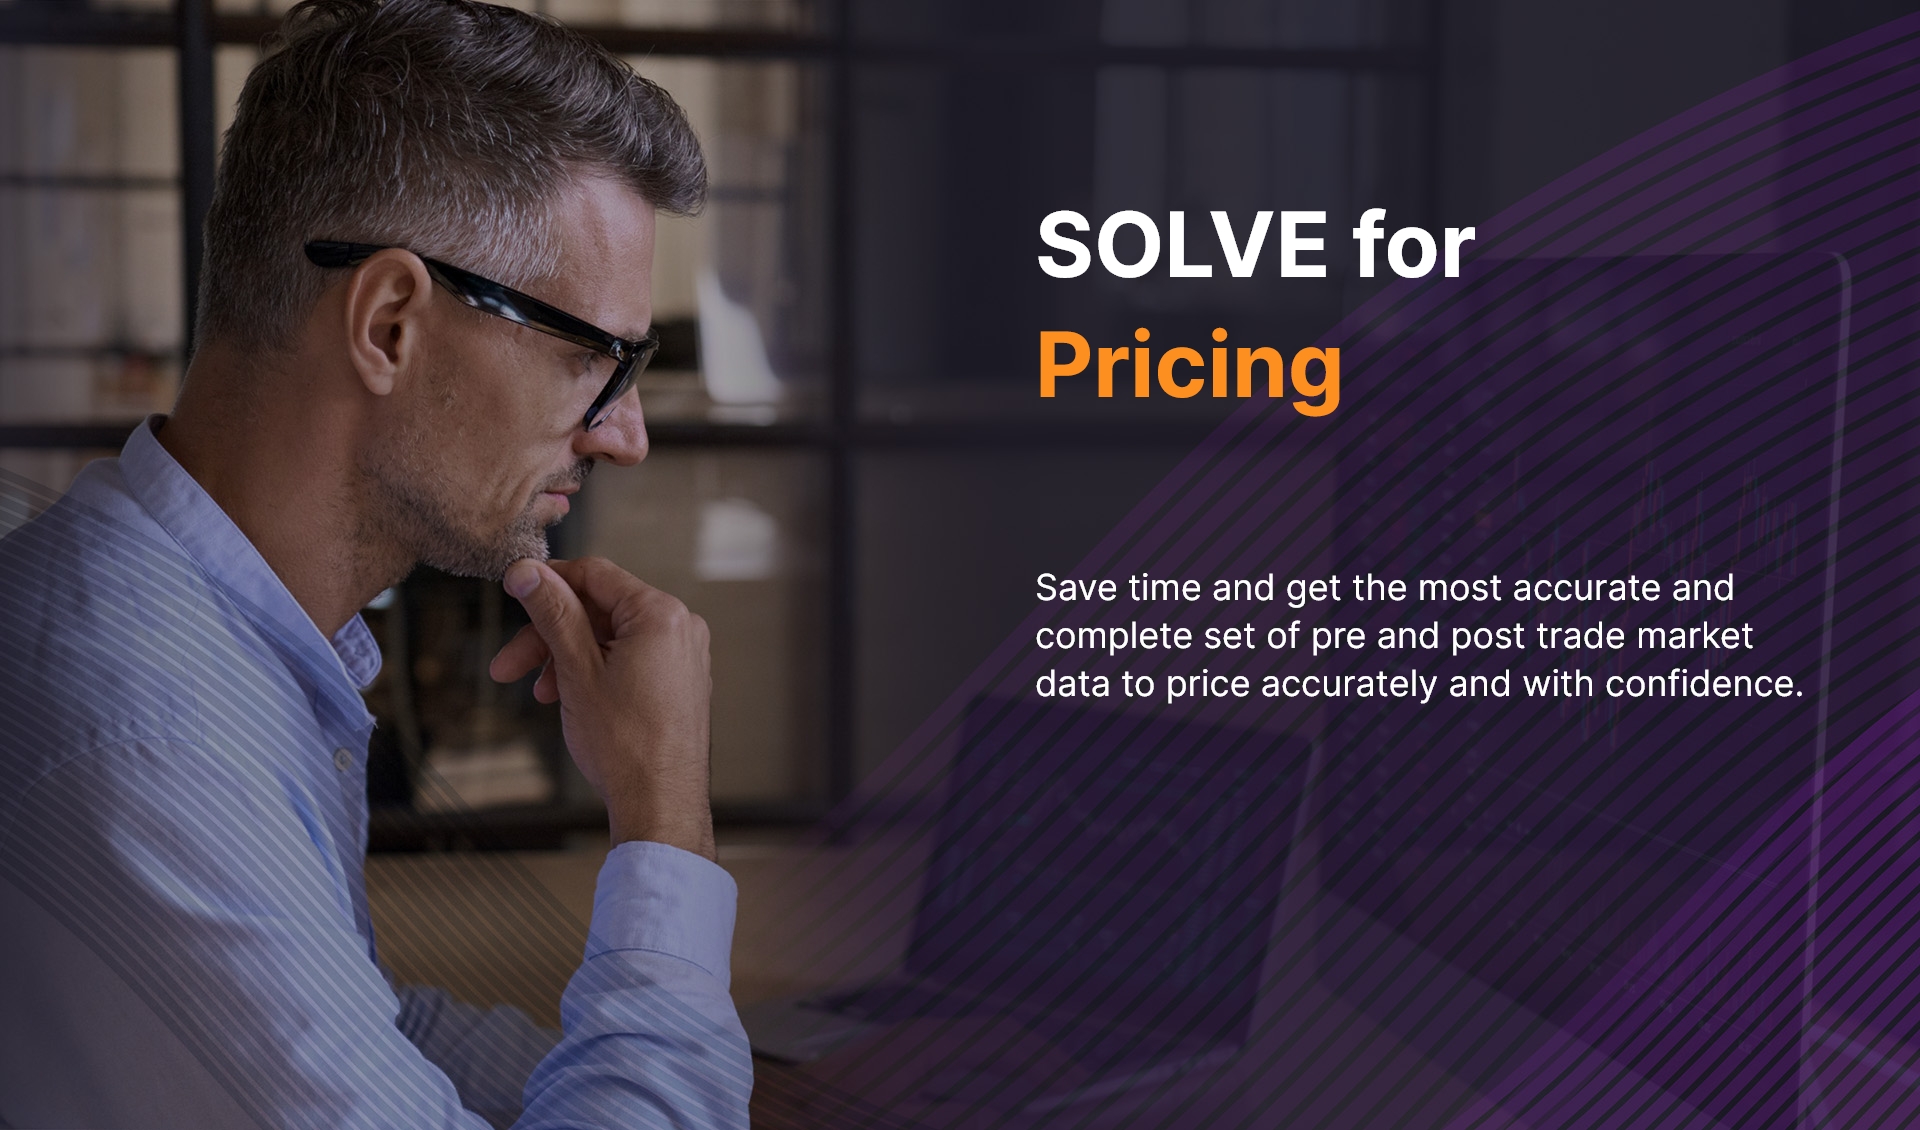 SOLVE for Pricing